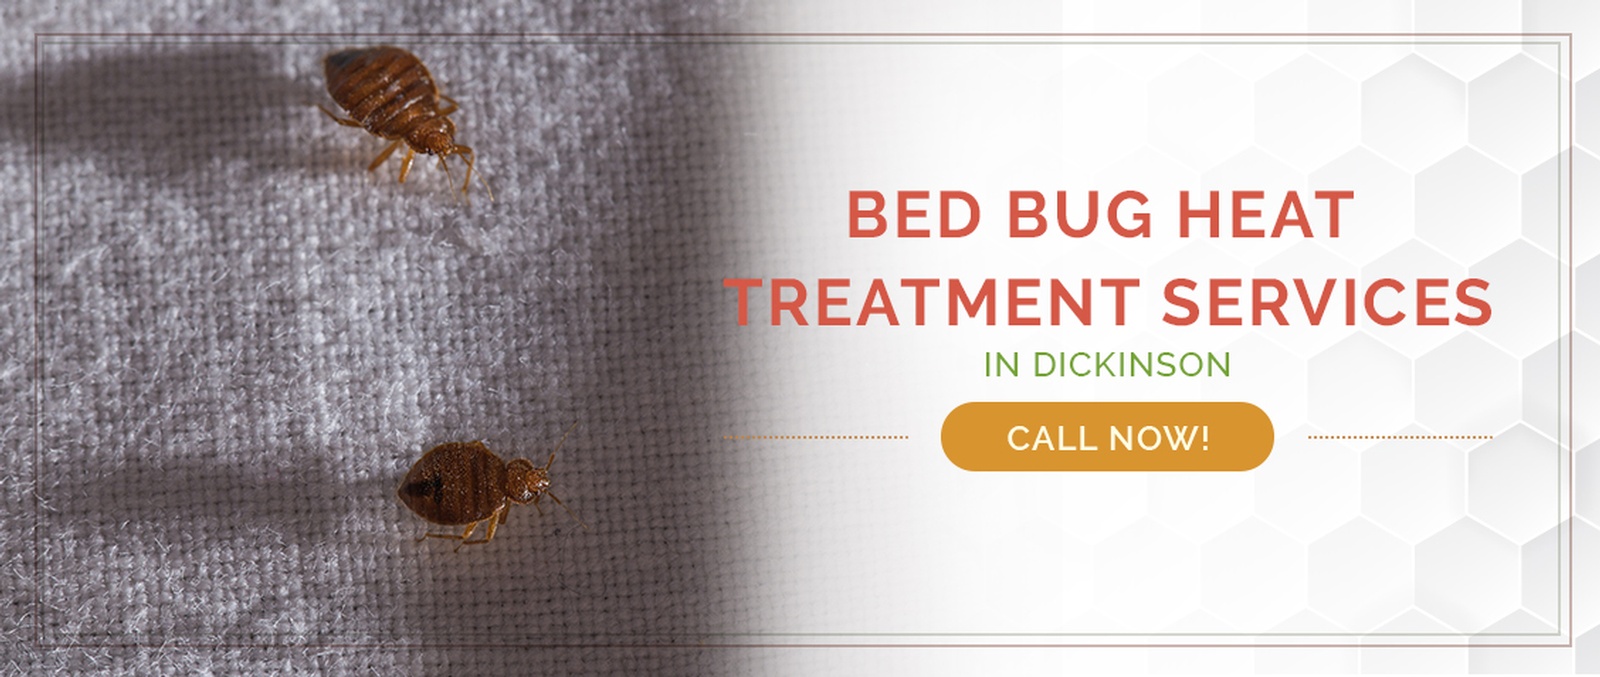 Dickinson Bed Bug Treatment / Heater Rental Services by Houston Bed Bug Heaters